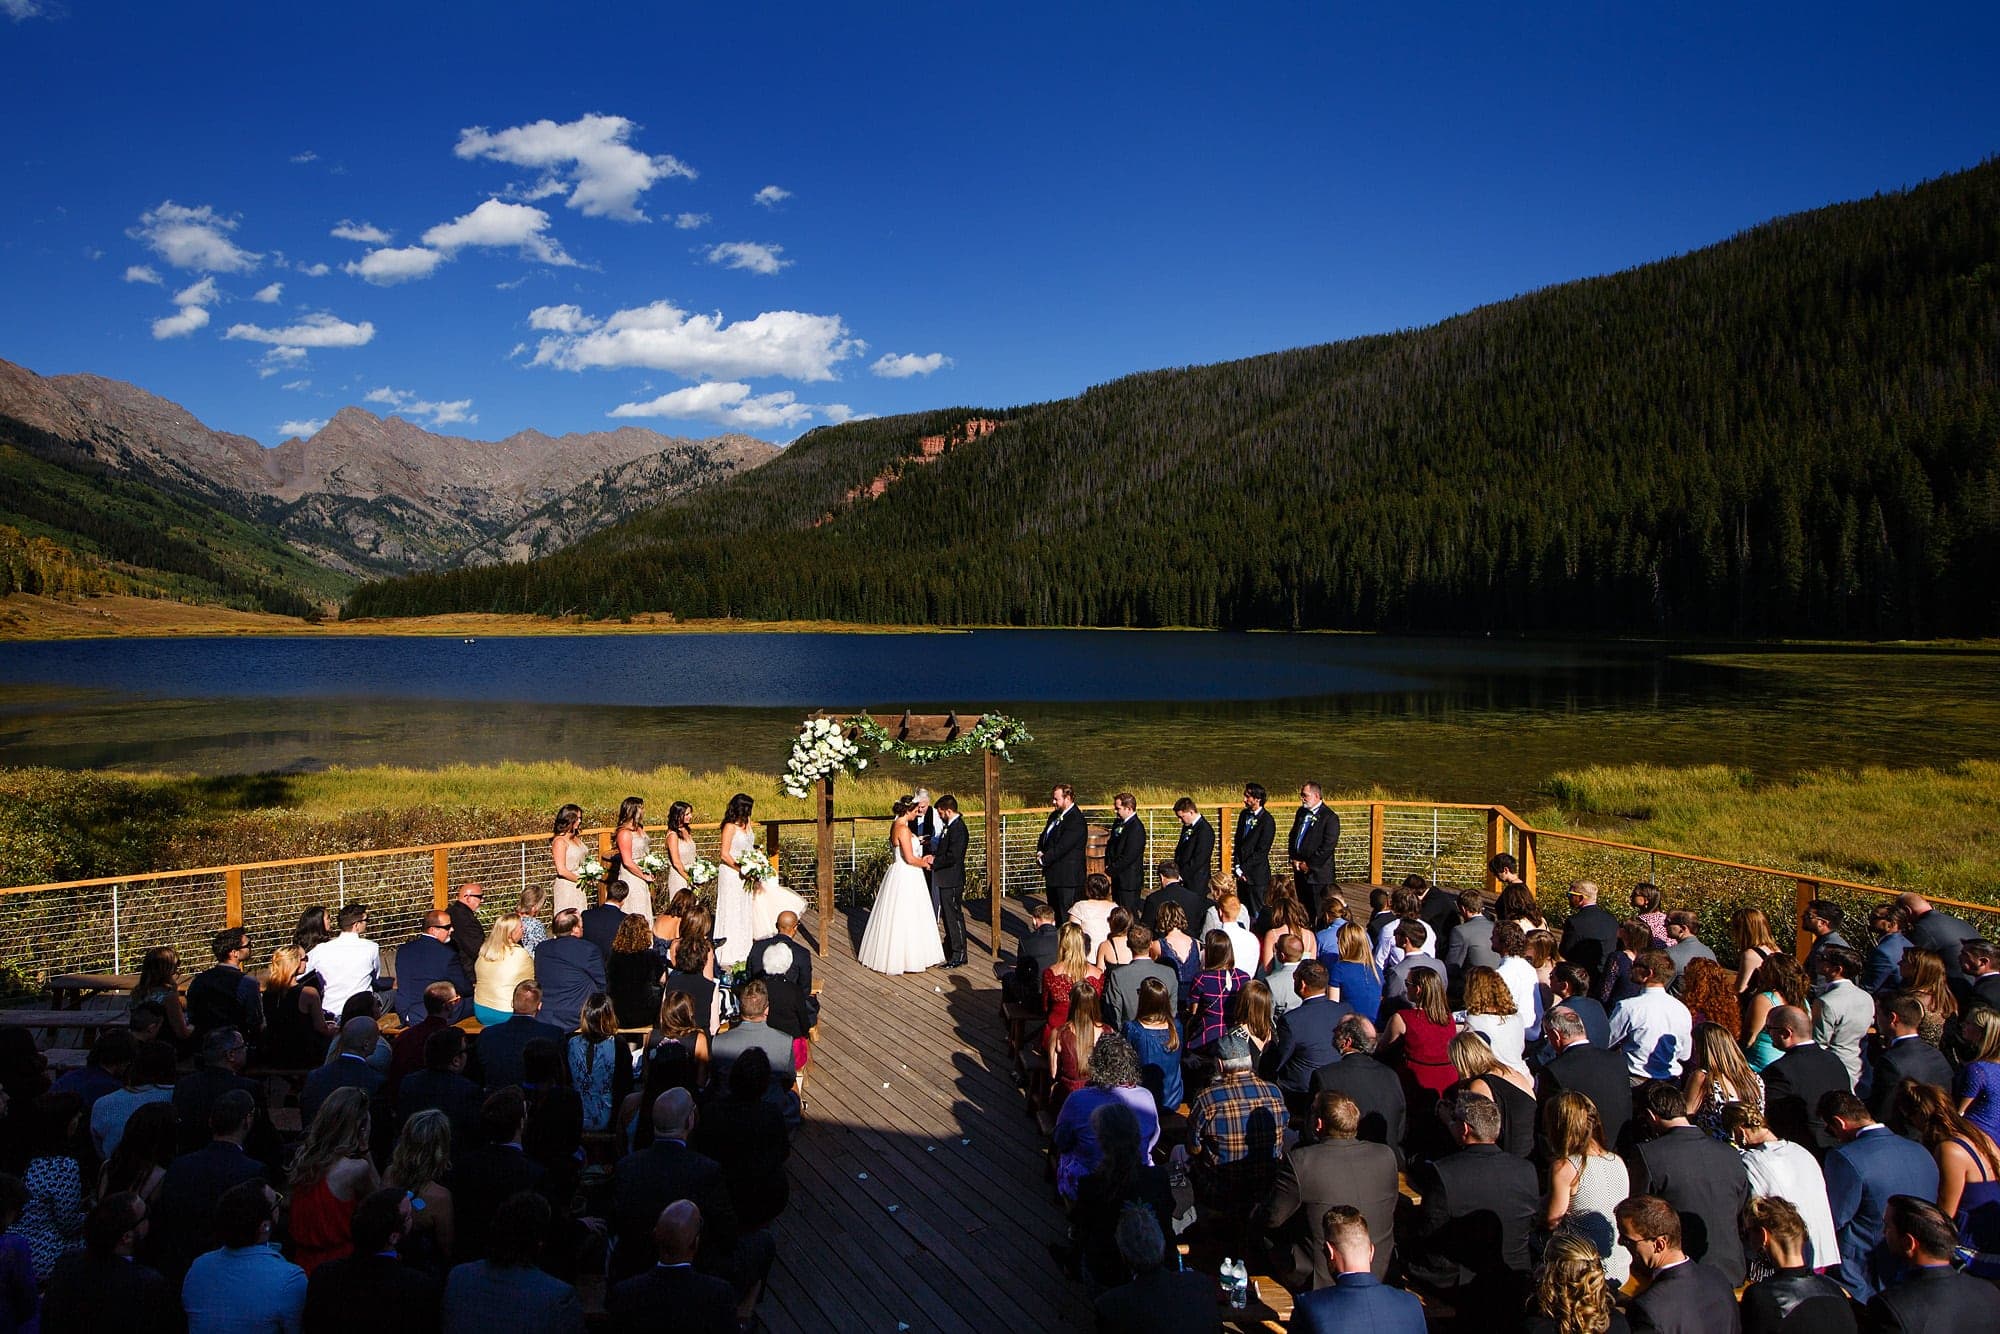 The wedding ceremony takes place on the deck at Piney River Ranch in September 2016 outside of Vail, Colorado with the Gore mountain range in the background.